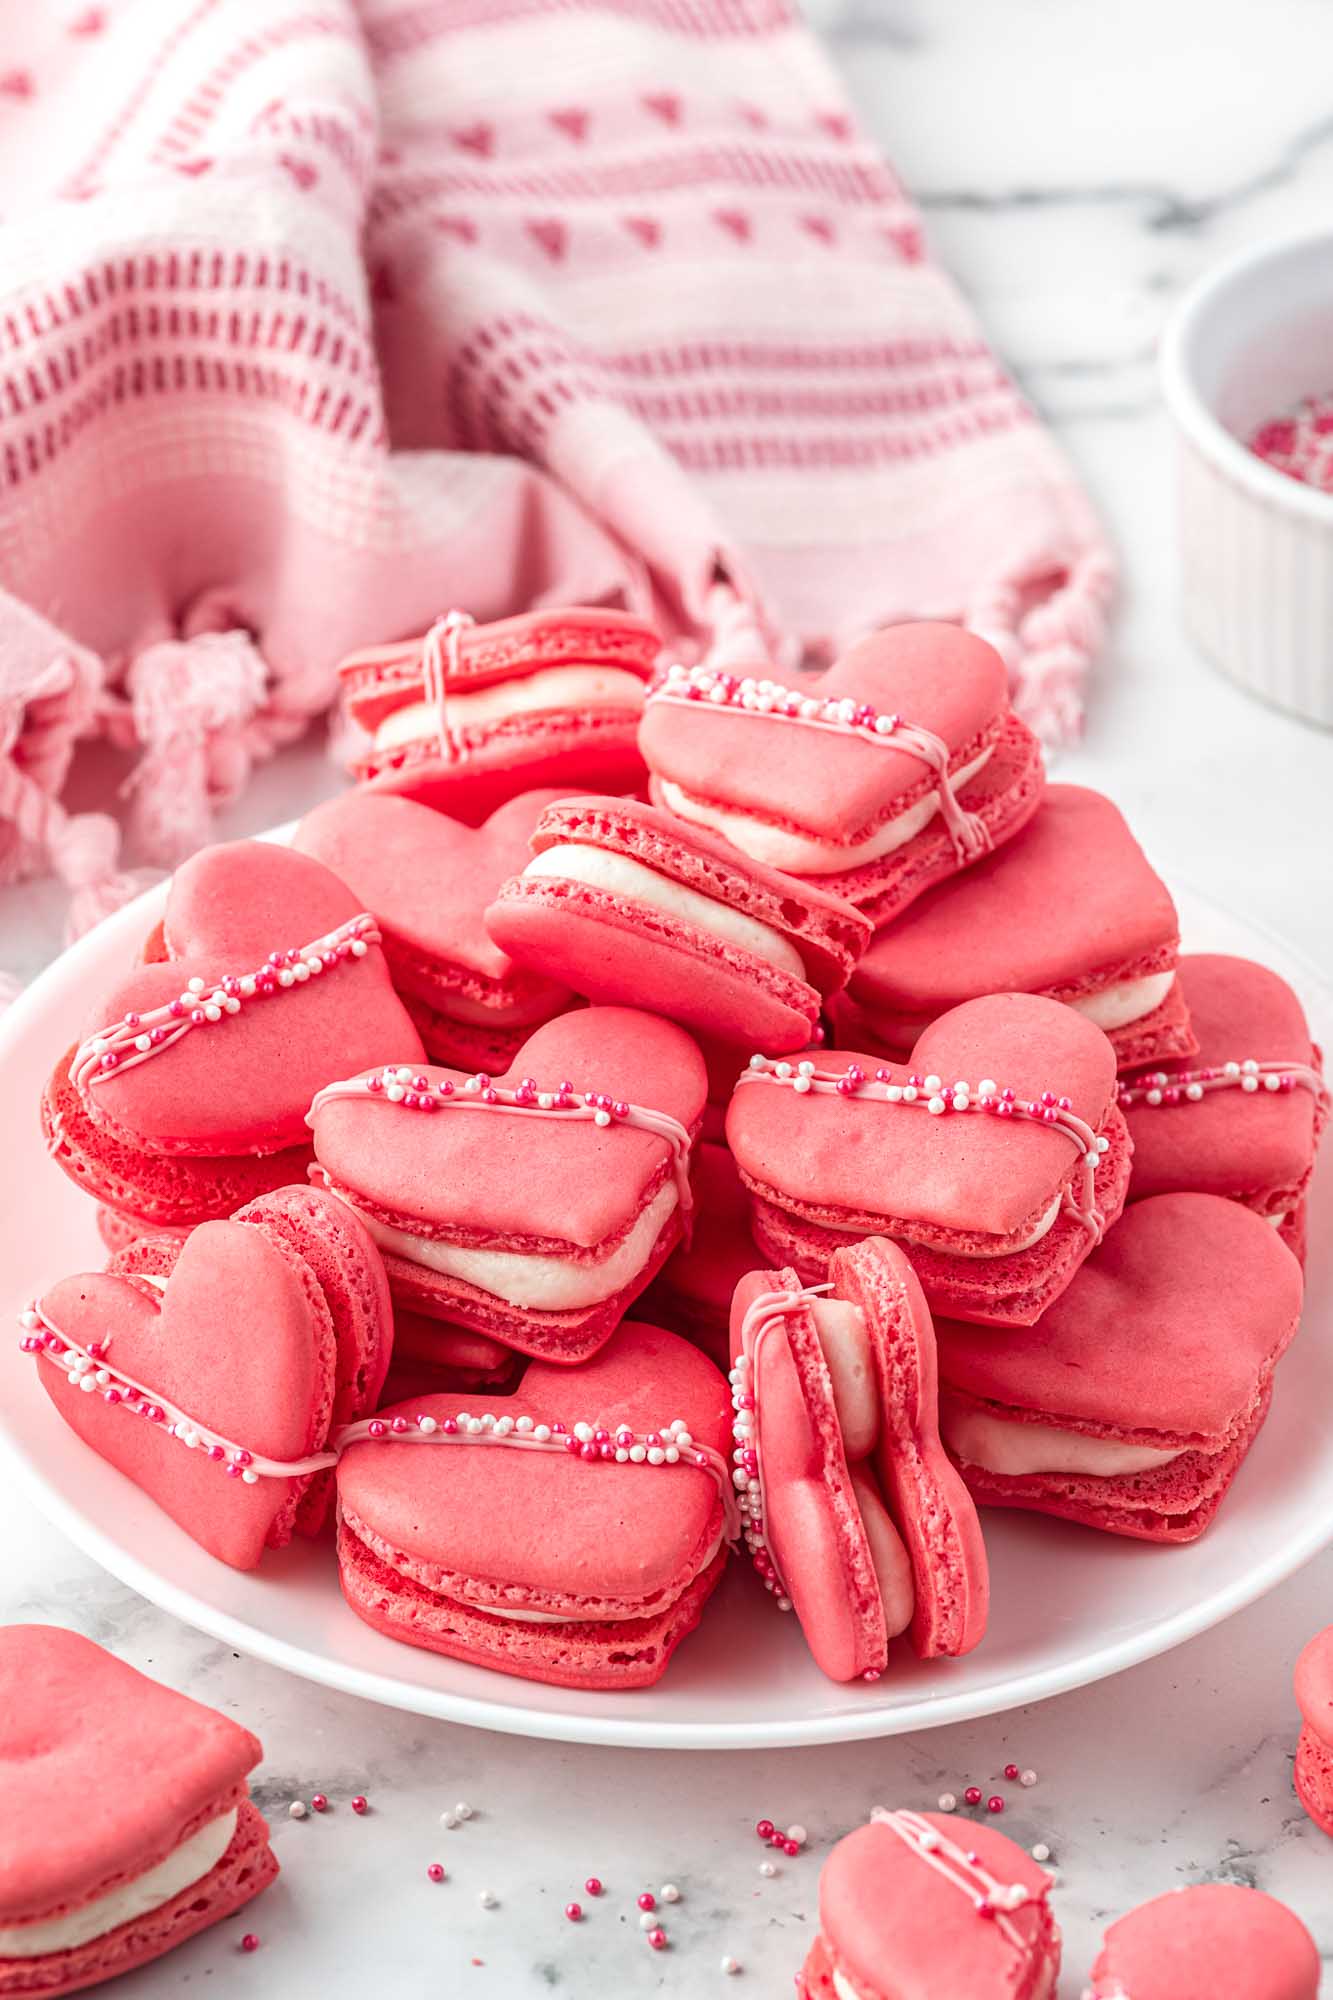 Heart shaped macarons piled on a white plate